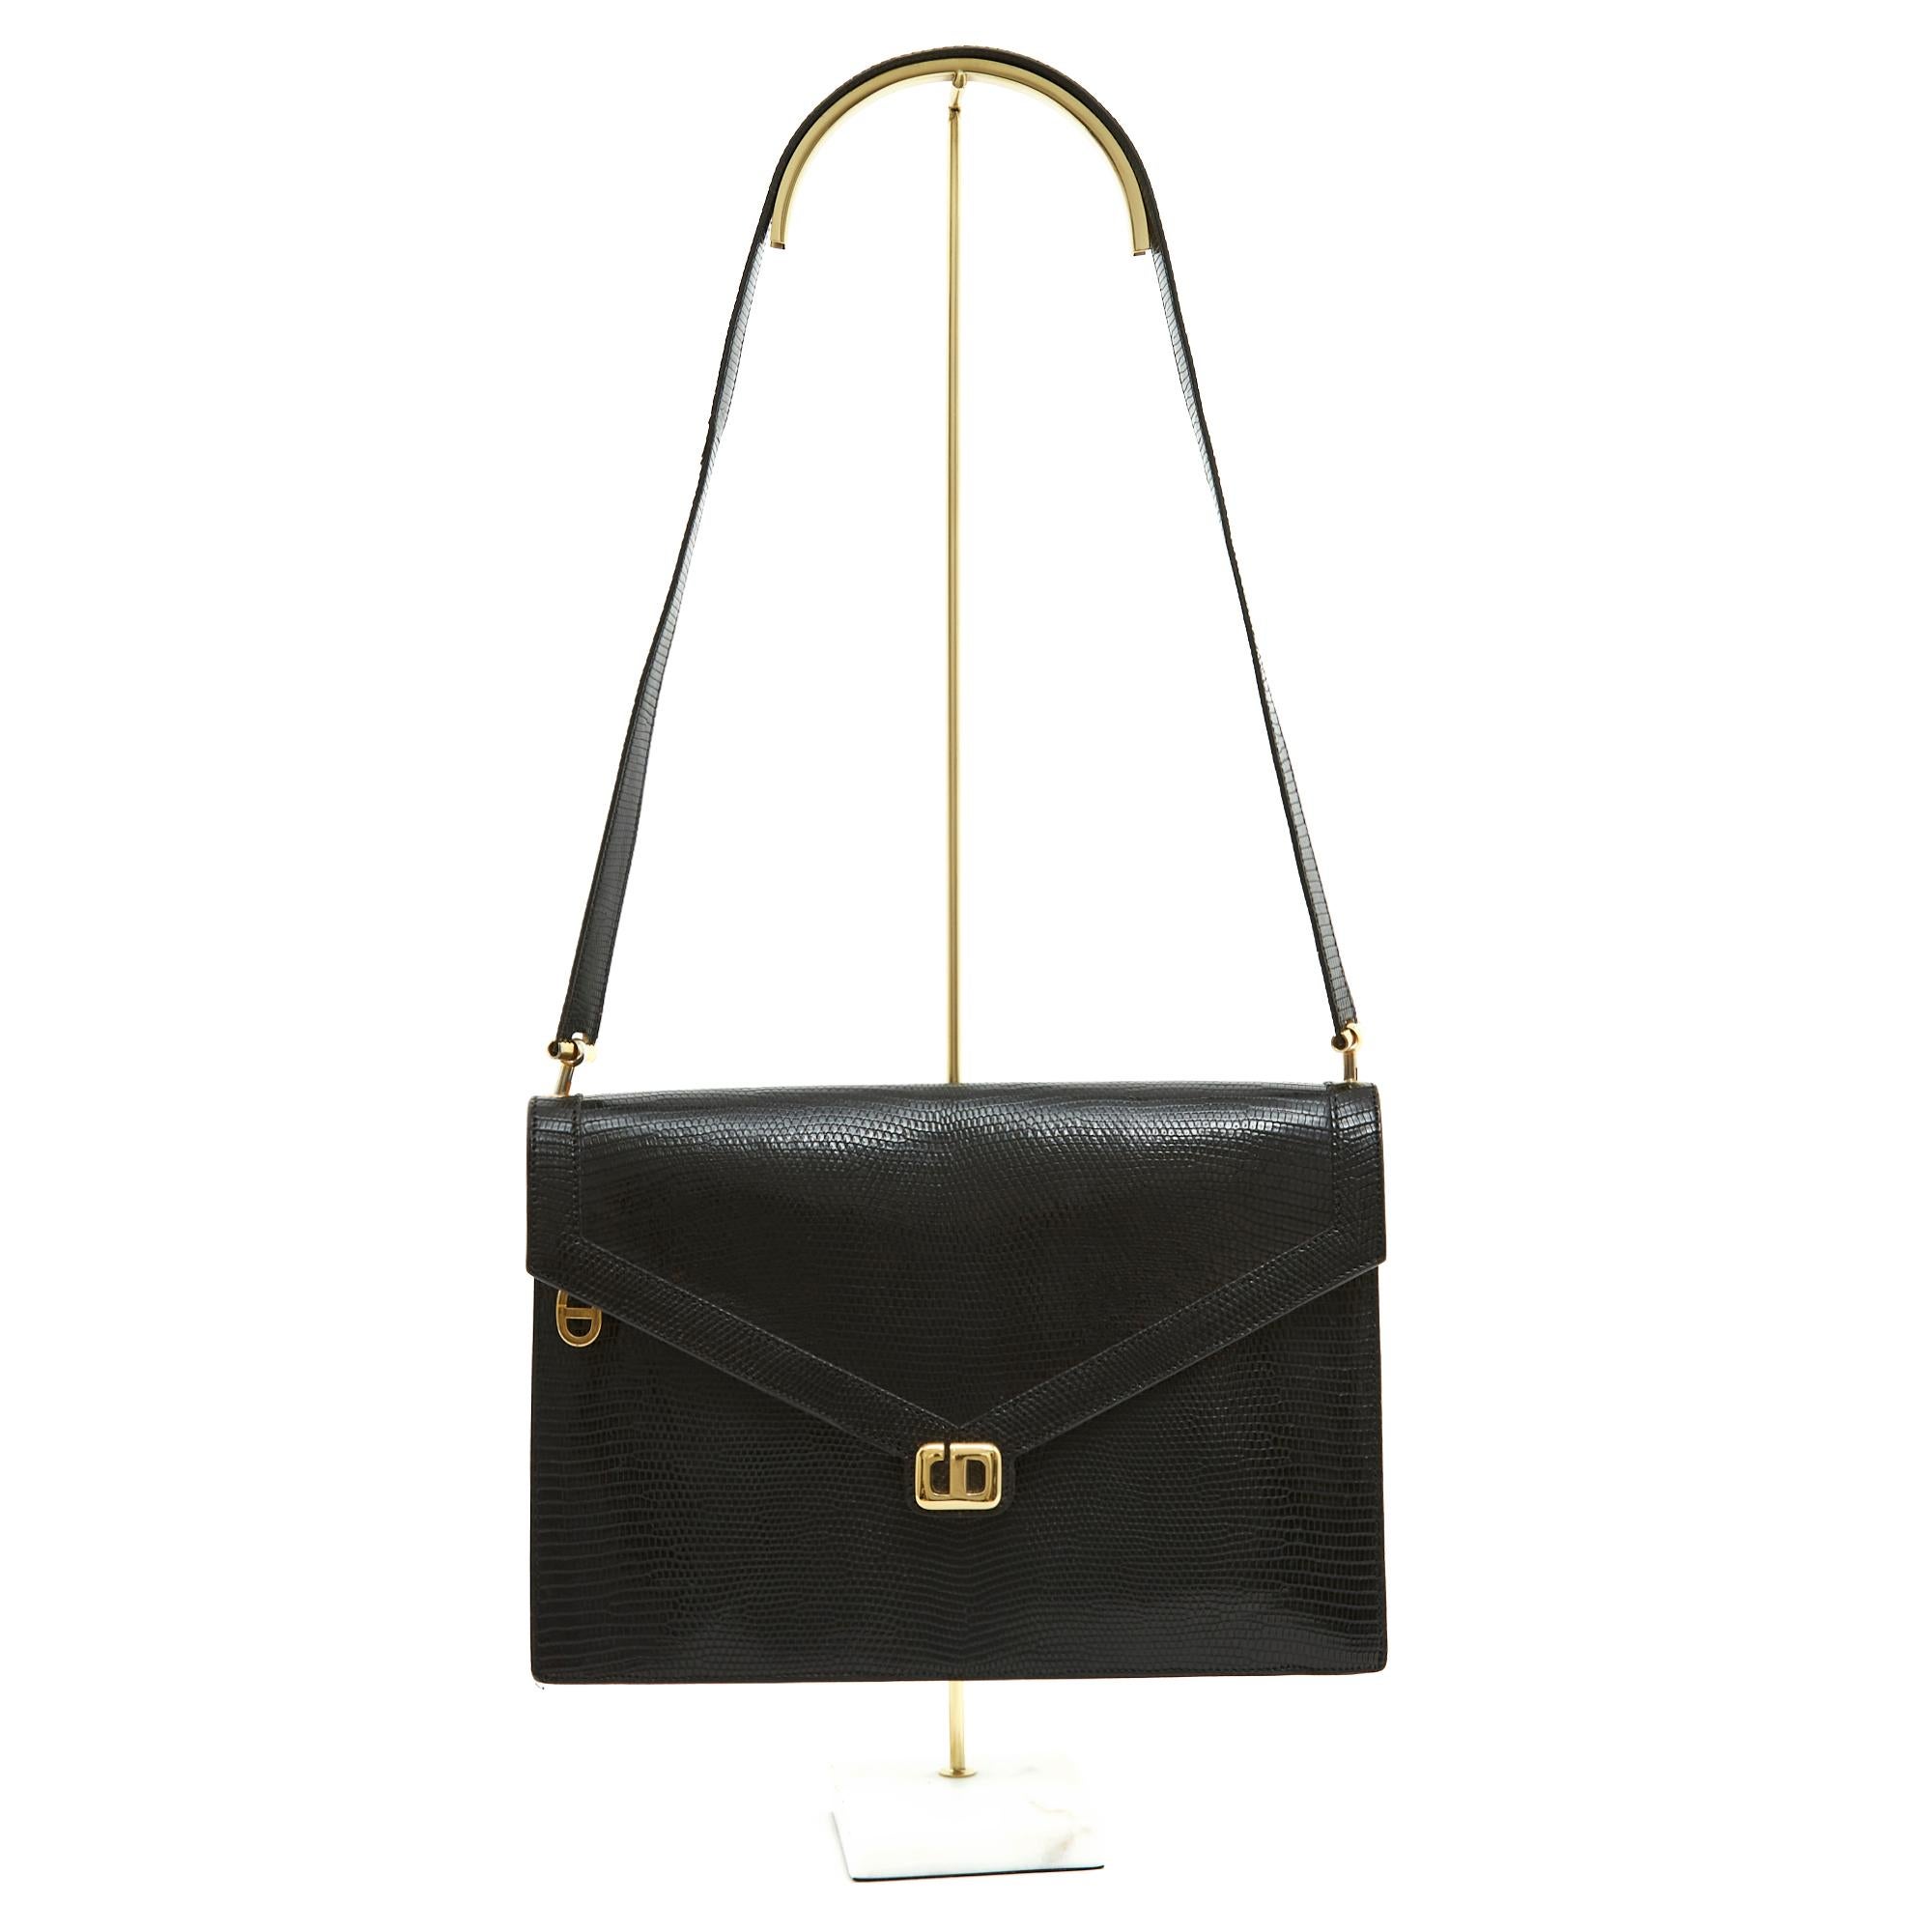 Christian Dior bag consisting of an envelope-shaped black lizard clutch closed by a press stud under the Dior logo in gilded metal, interior in black leather, and a short and removable original shoulder strap in black lizard and gilded metal and a